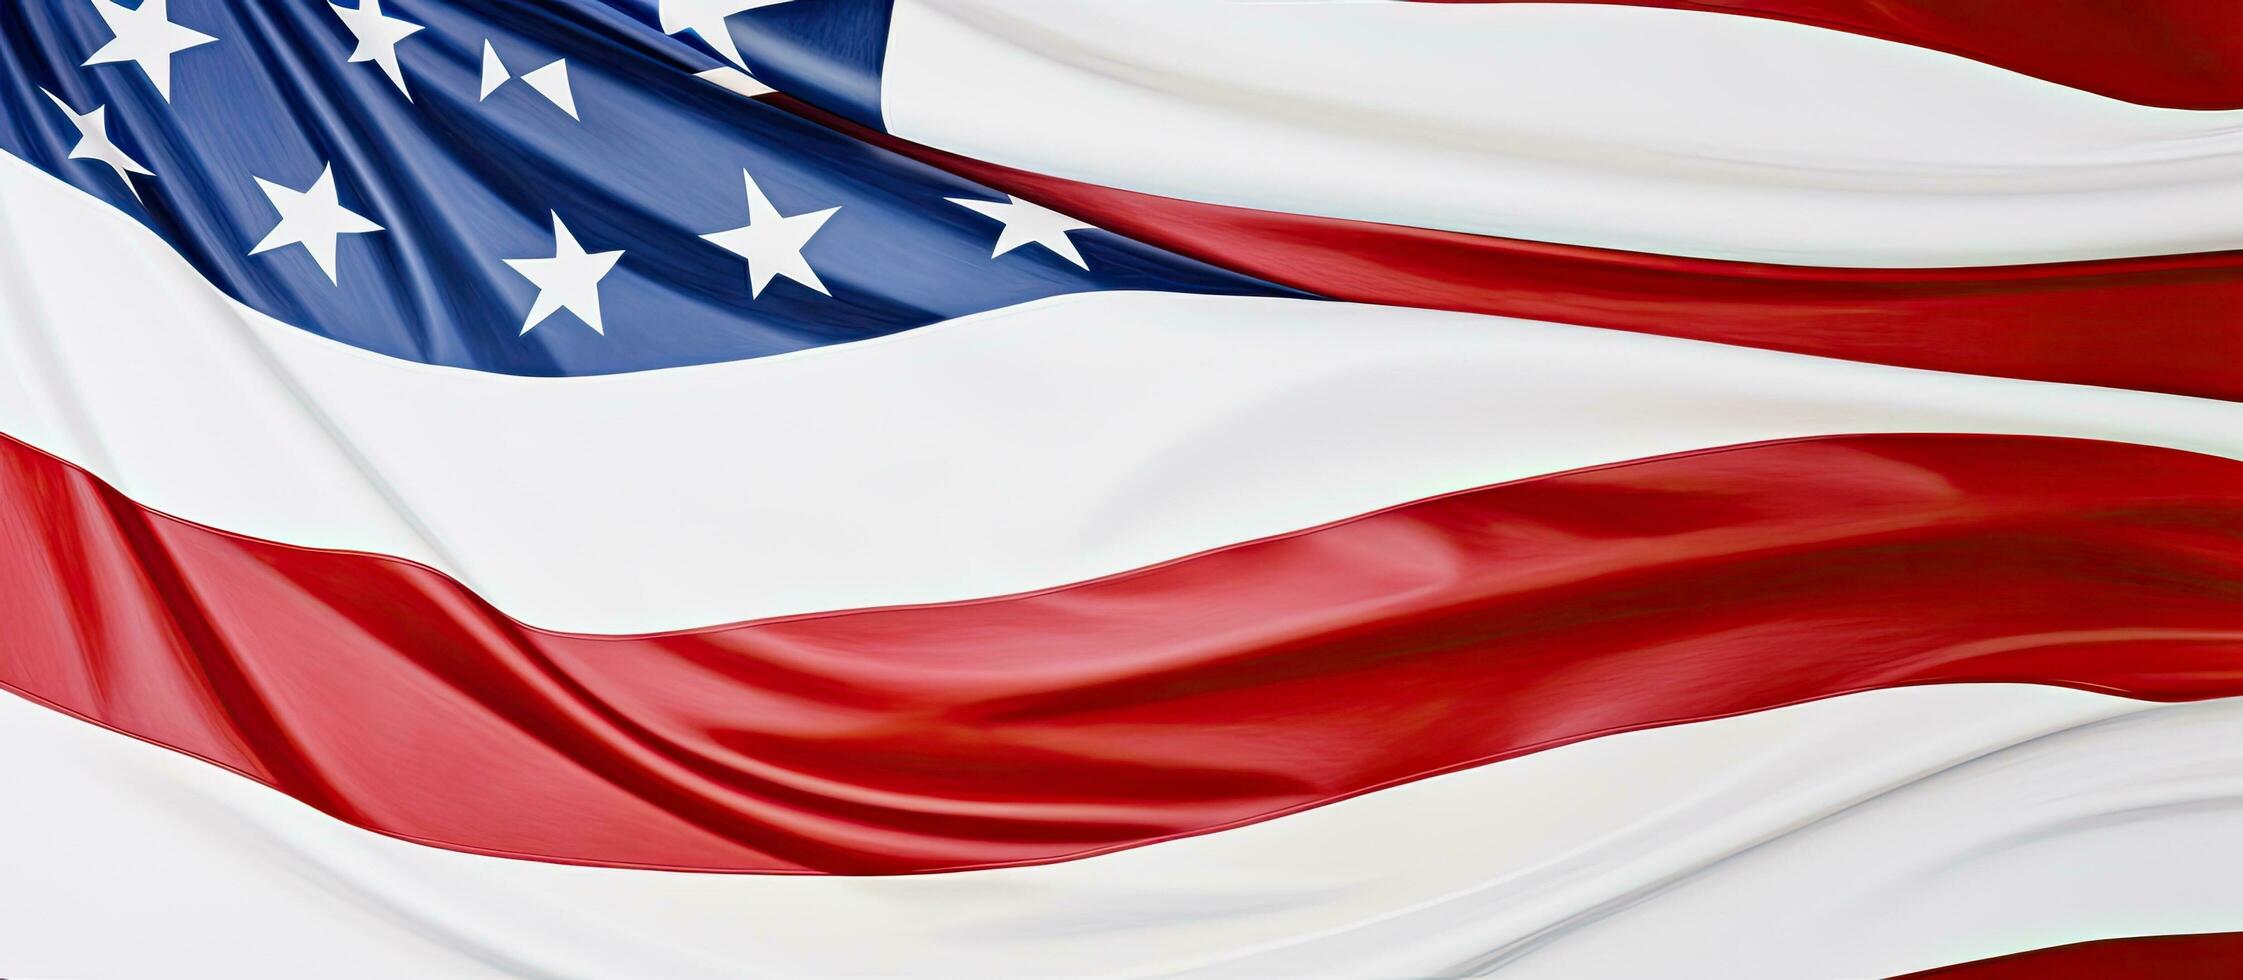 A close-up photograph shows a section of the American flag on a white background. There is space photo